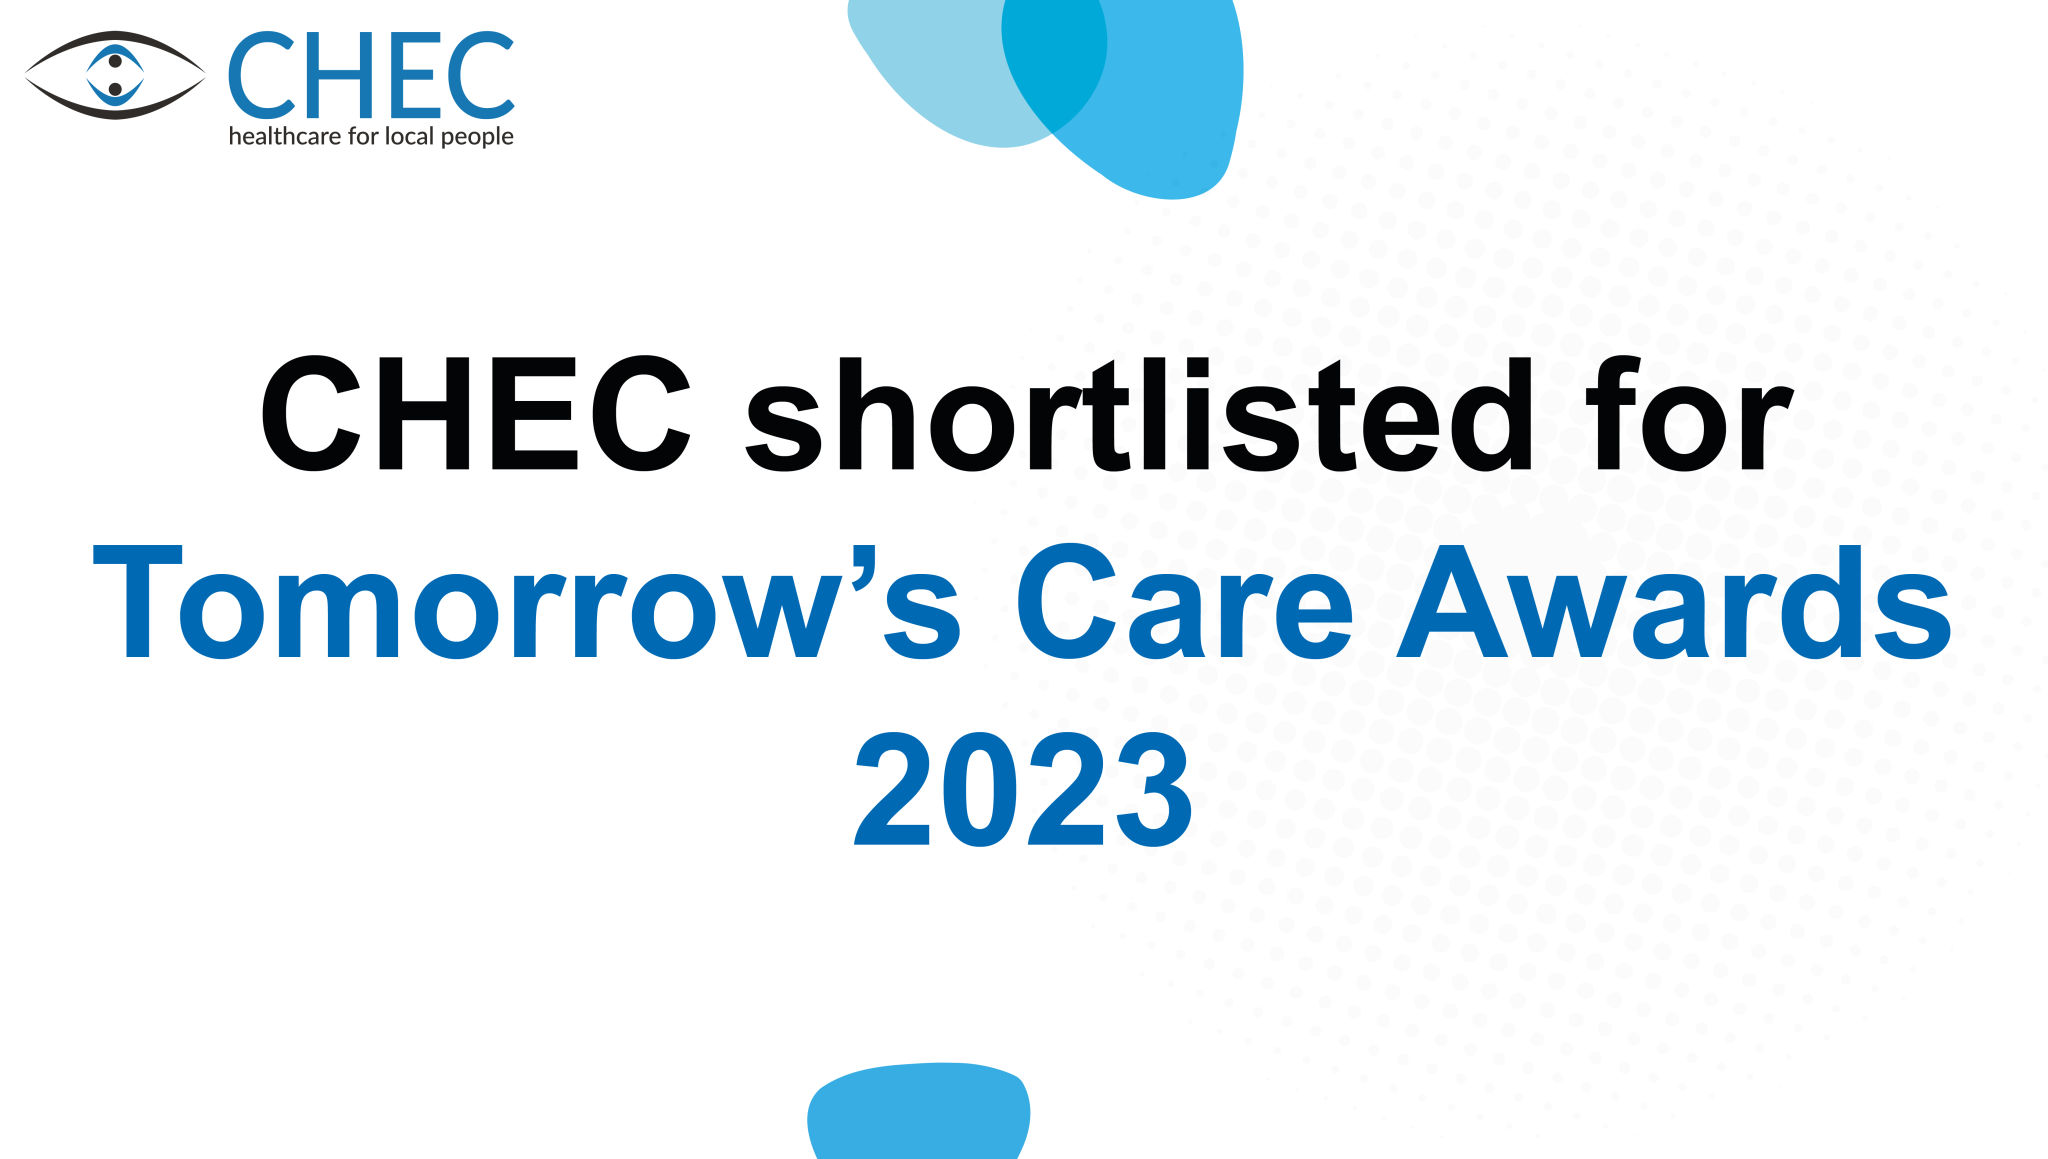 chec shortlisted for tomorrows care awards 2023